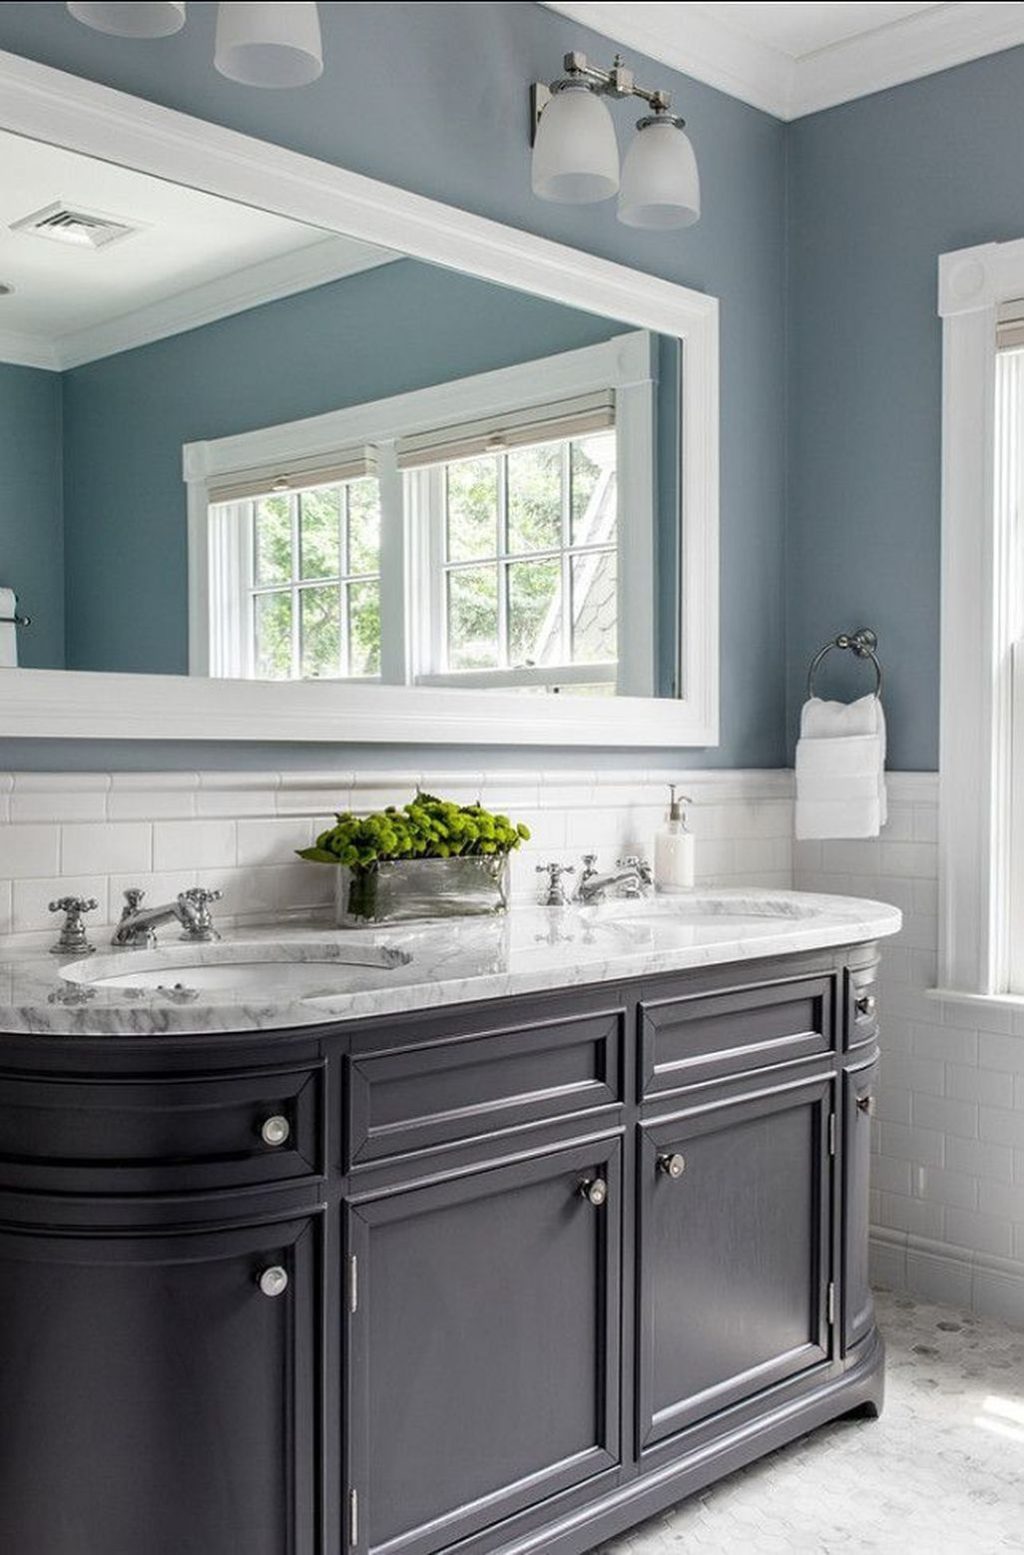 Use of paint 1 Top 10 Outdated Bathroom Design Trends to Avoid - 19